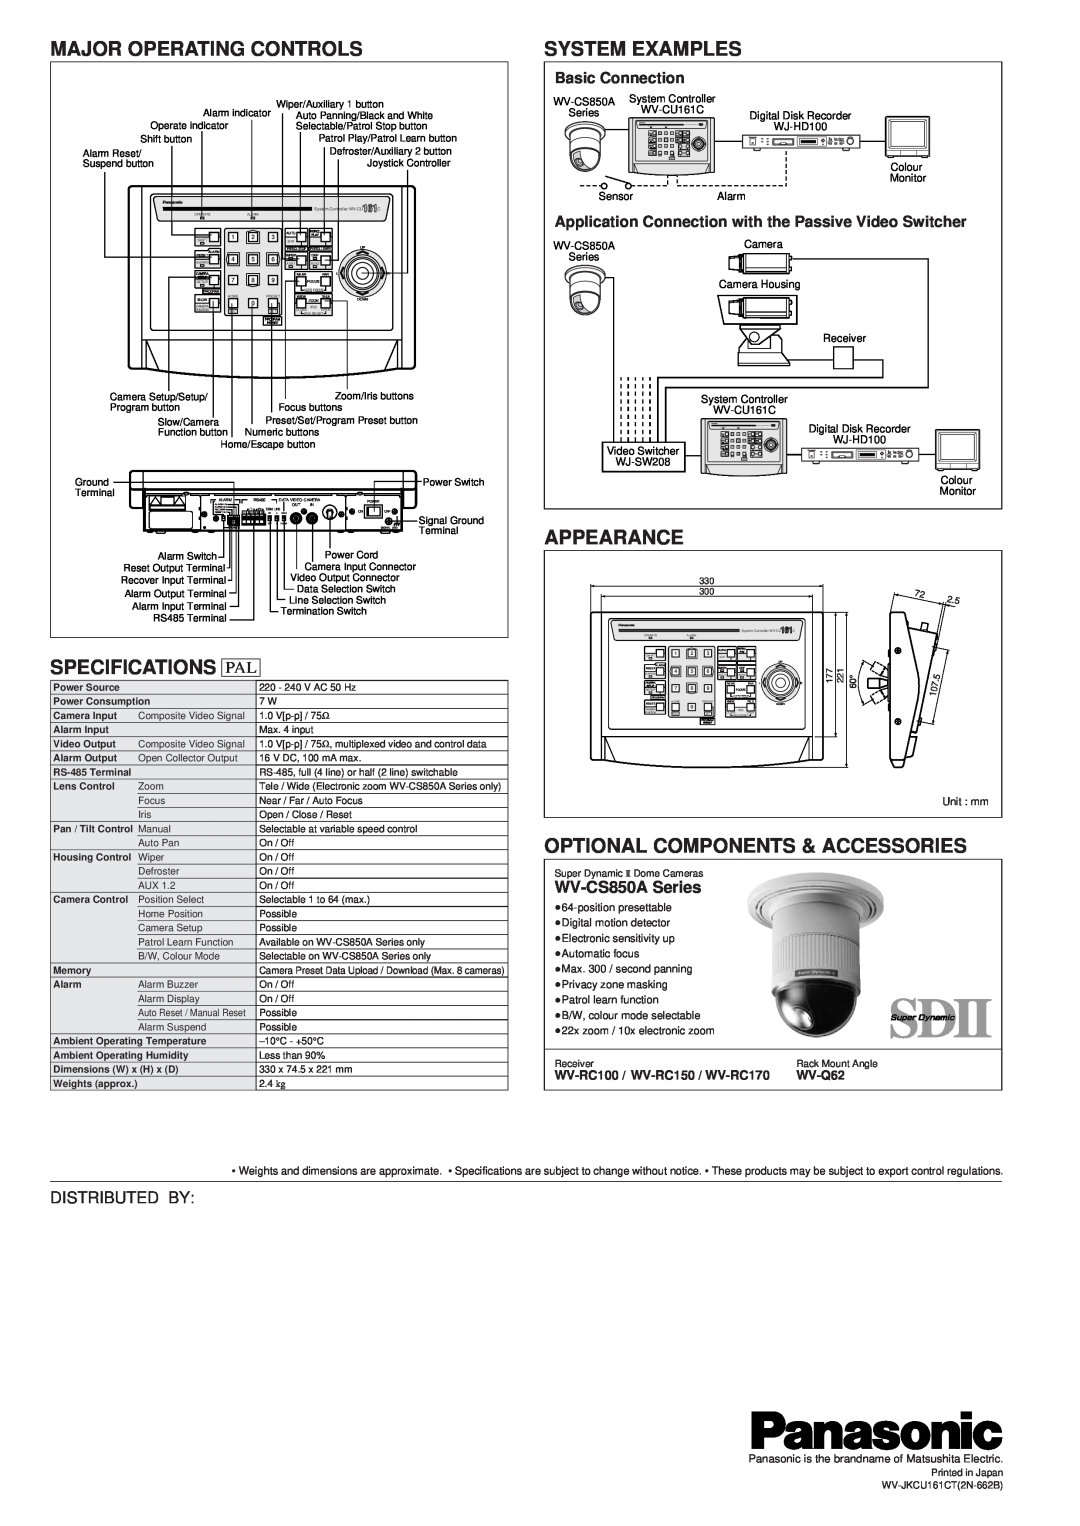 Panasonic WV-CU161C manual Major Operating Controls, System Examples, Appearance, Specifications, WV-CS850A Series, WV-Q62 